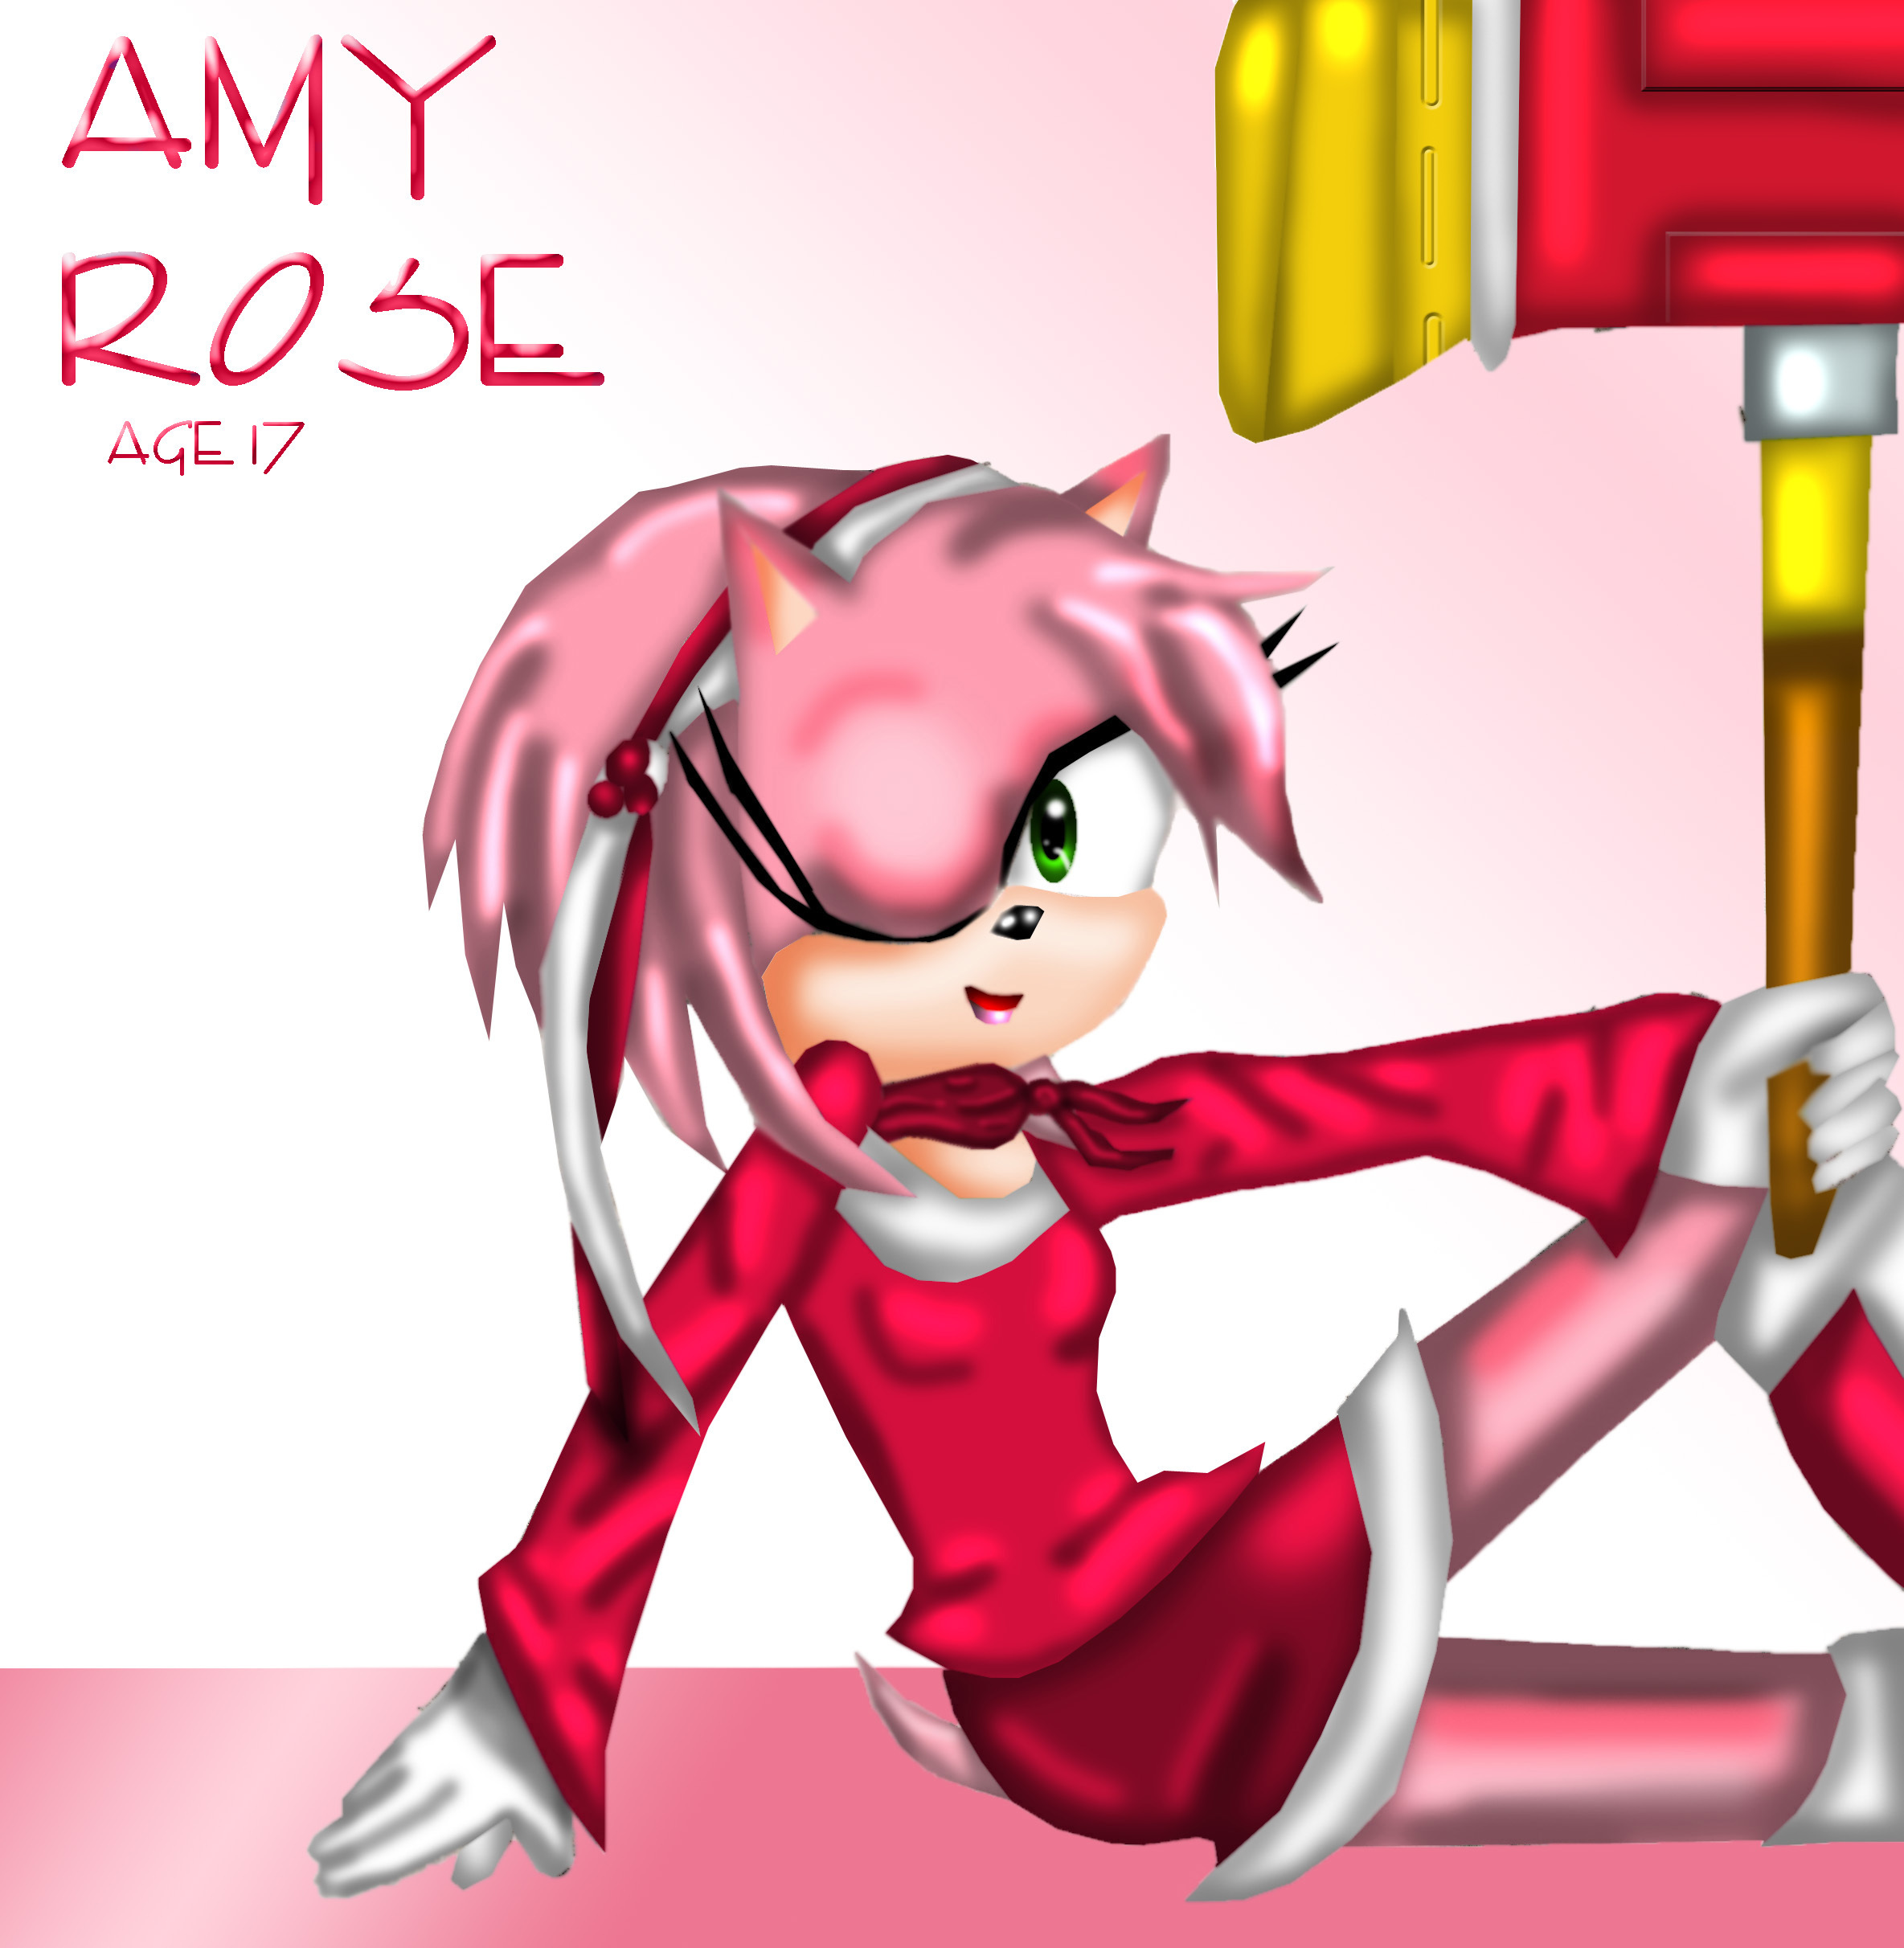 Fan Art of Amy Rose: Age 17 for fans of Amy Rose. 